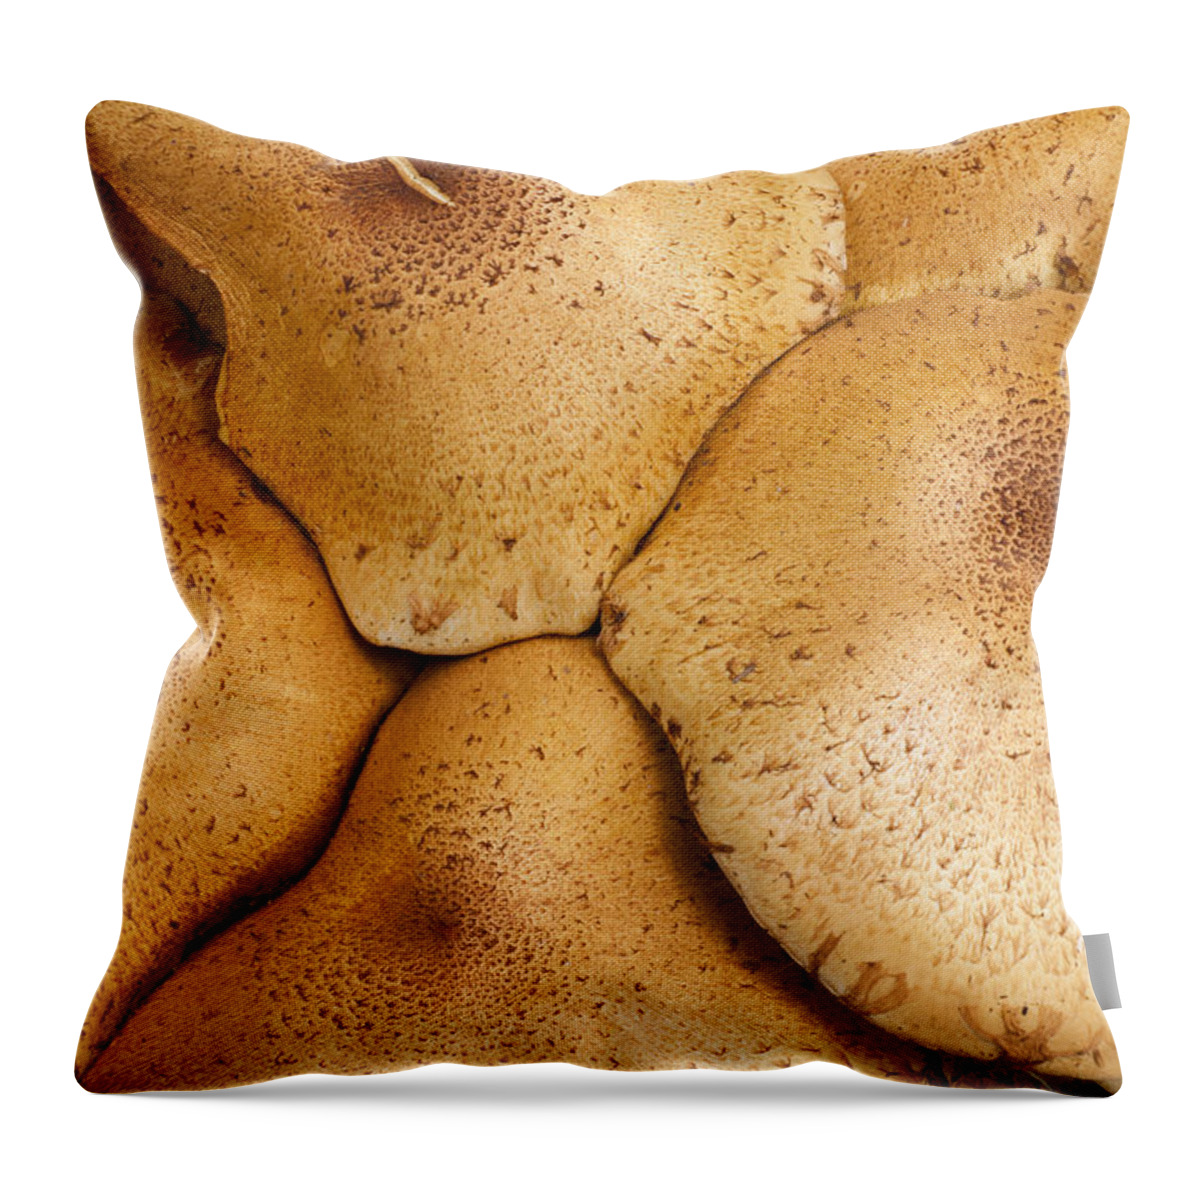 Feb0514 Throw Pillow featuring the photograph Honey Fungus Mushrooms Germany by Duncan Usher